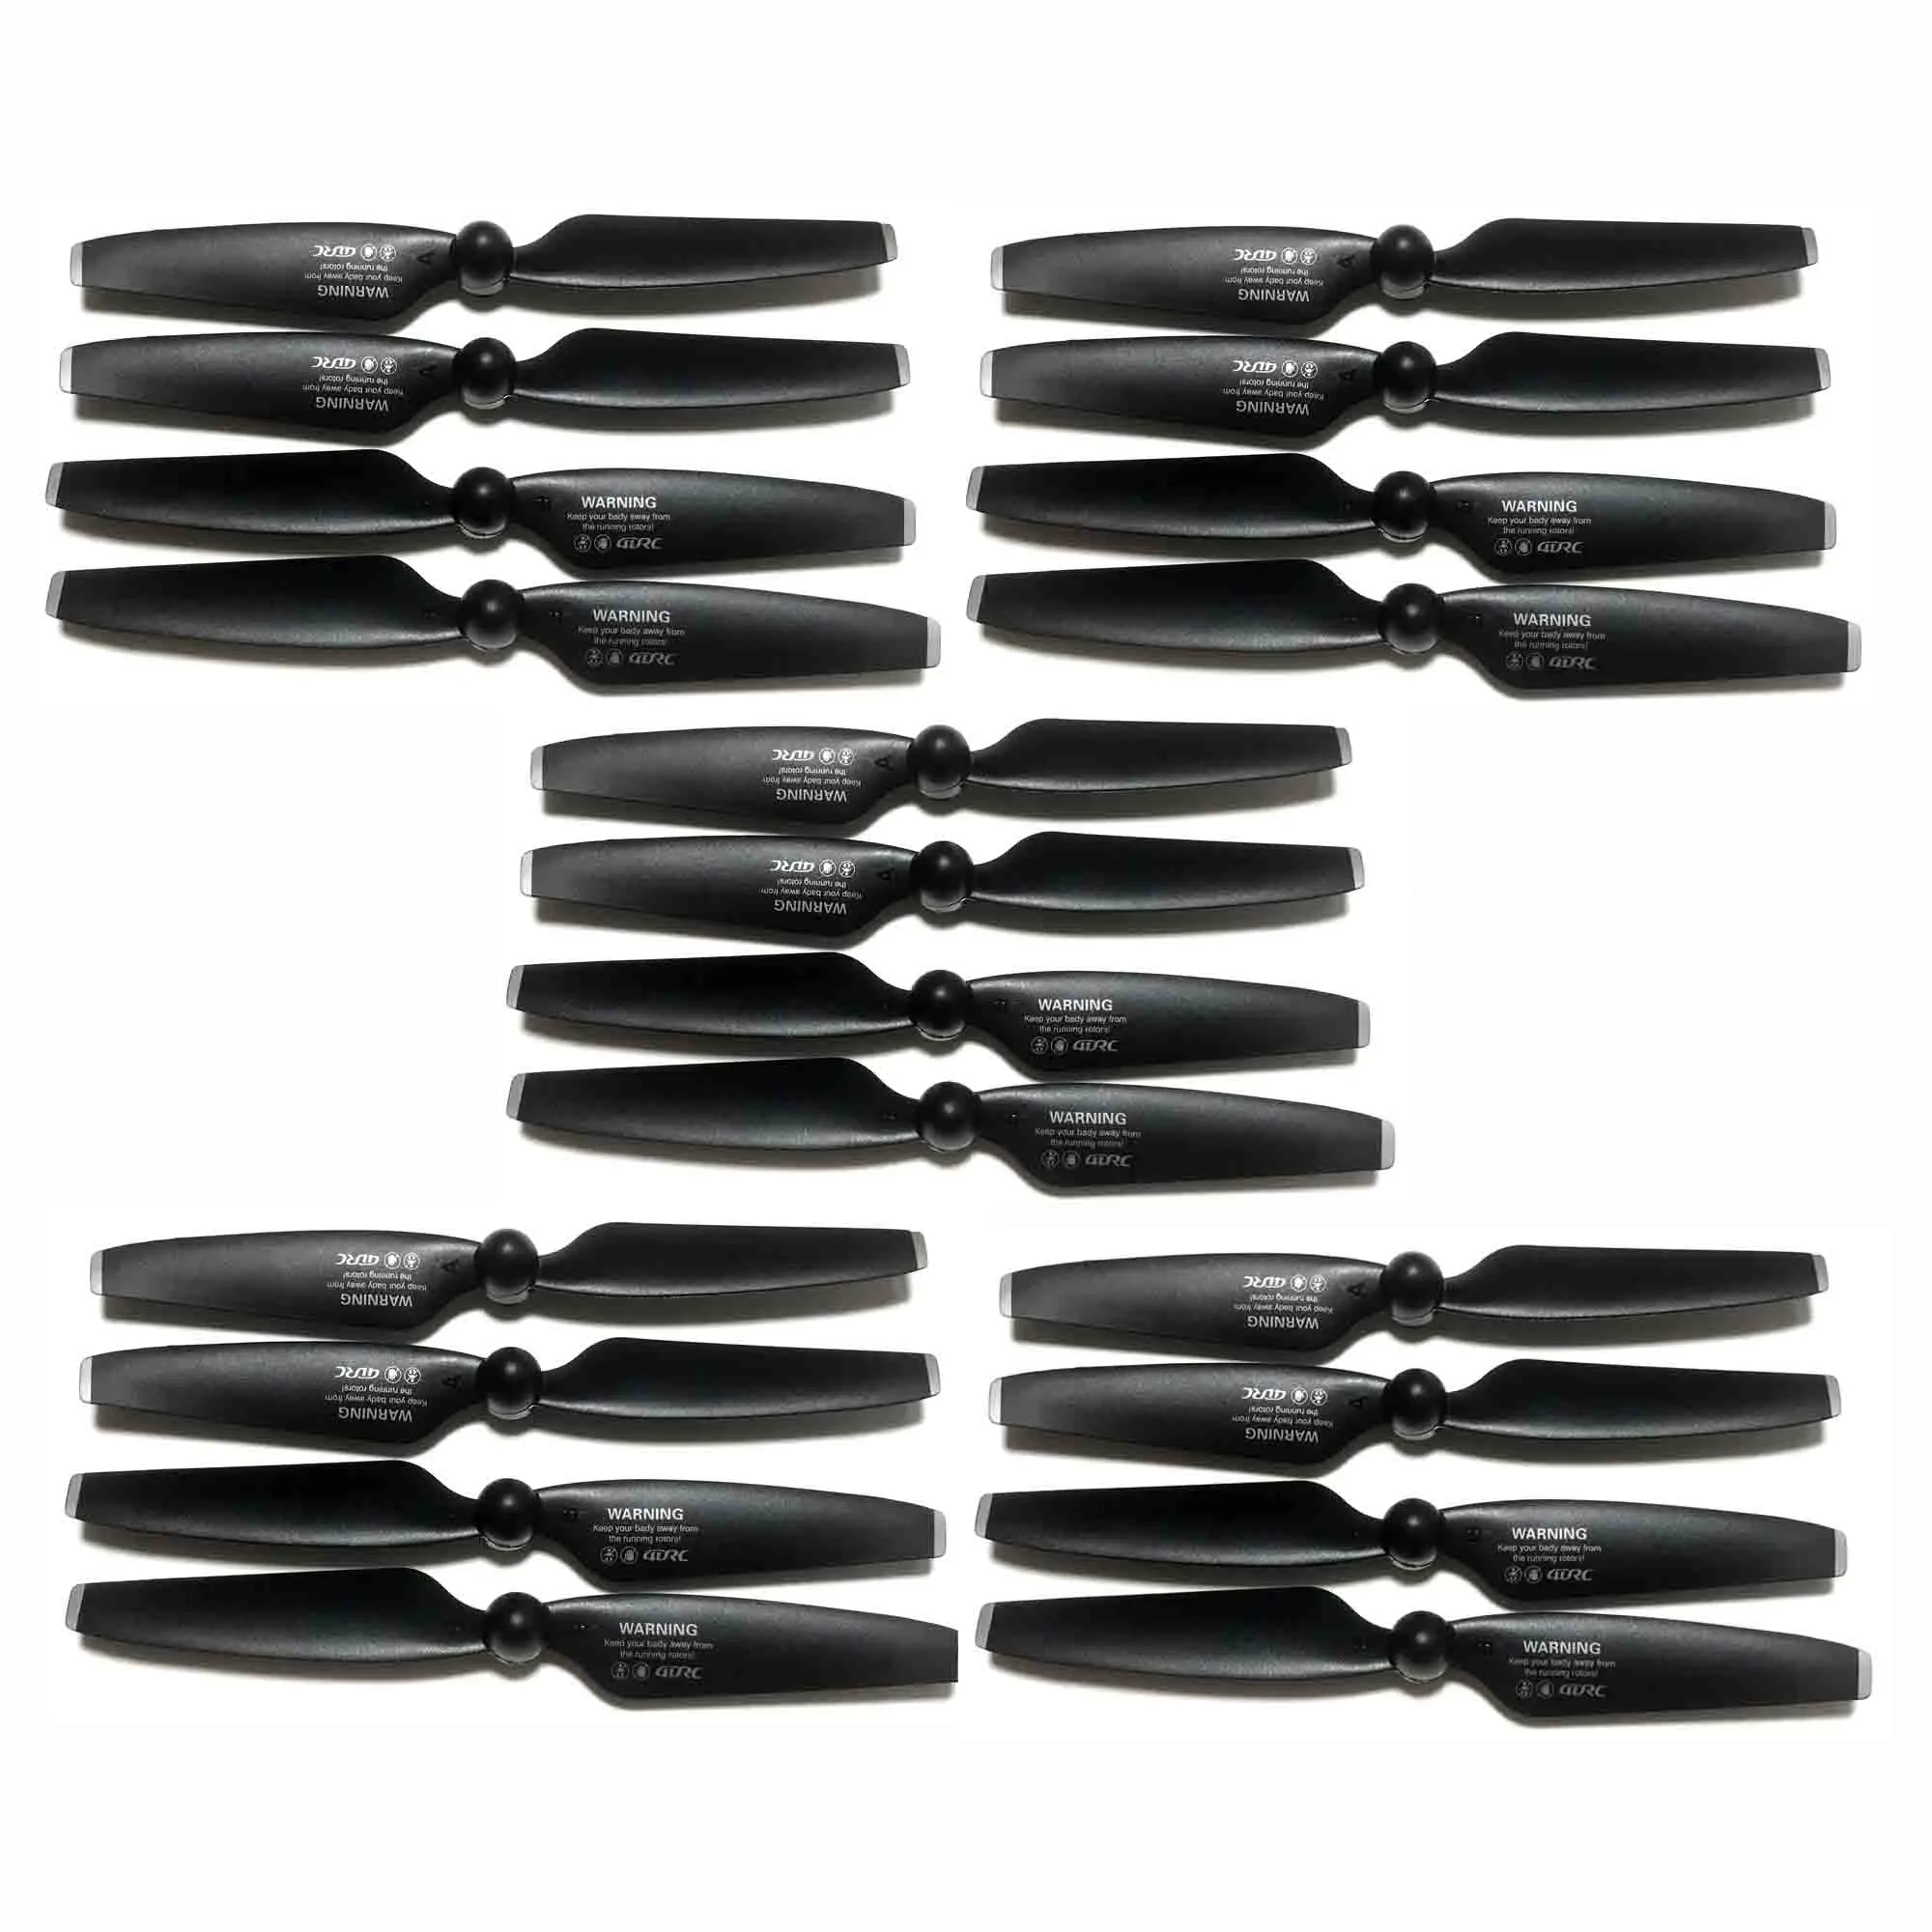 

4DRC F5 GPS drone 4D-F5 WiFi FPV RC Quadrotor Helicopter Spare Parts Propeller blade wing Maple Leaf Accessories 20PCS